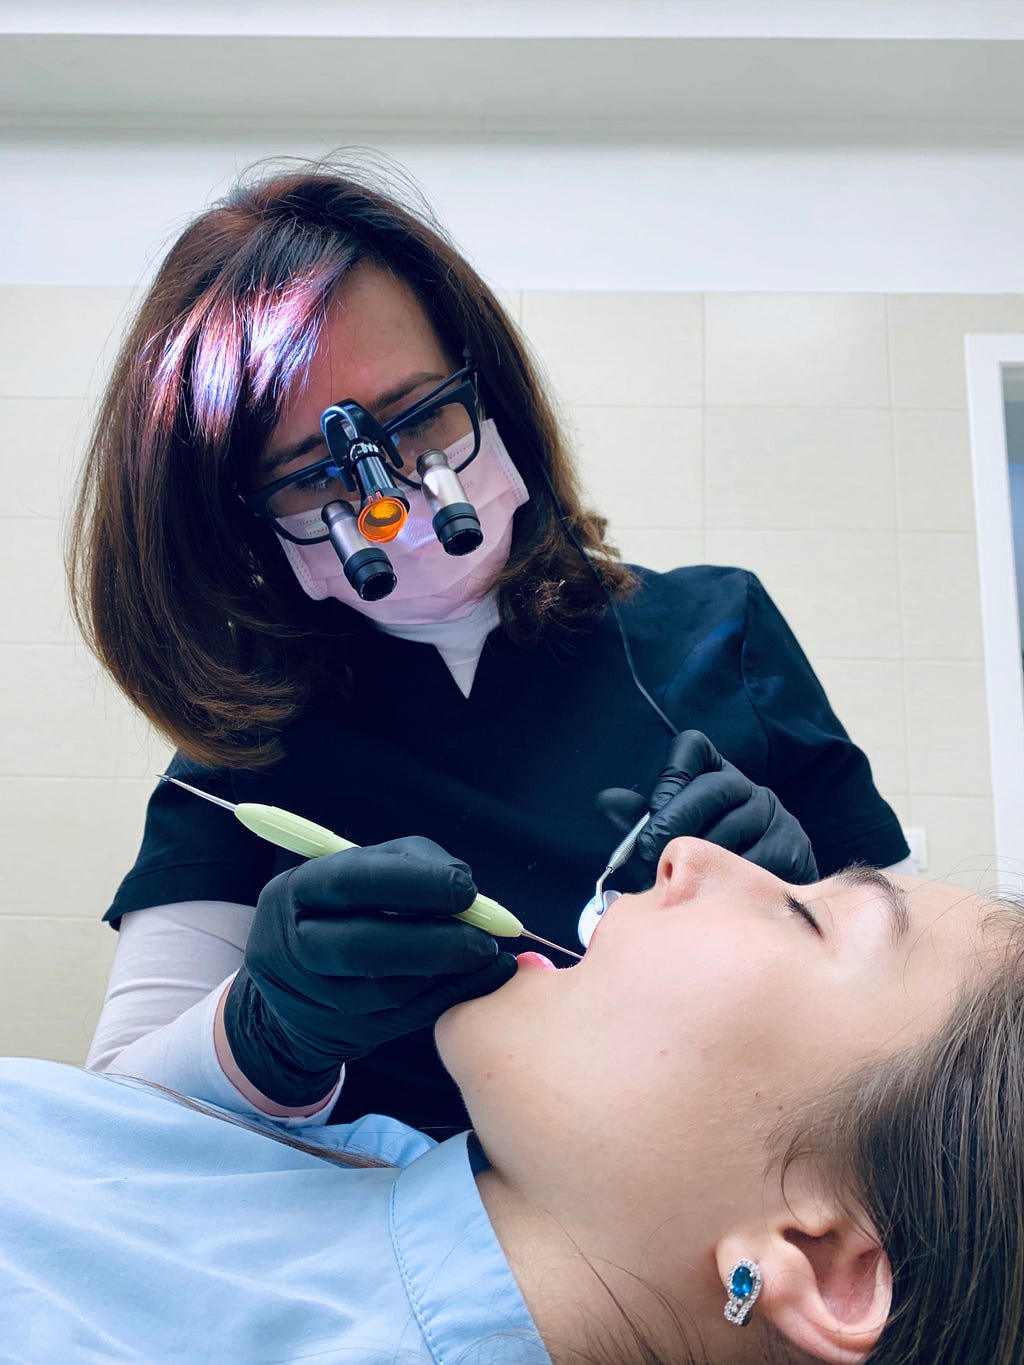 A dental technician with serious eyewear uses metal tools in a patient’s mouth.